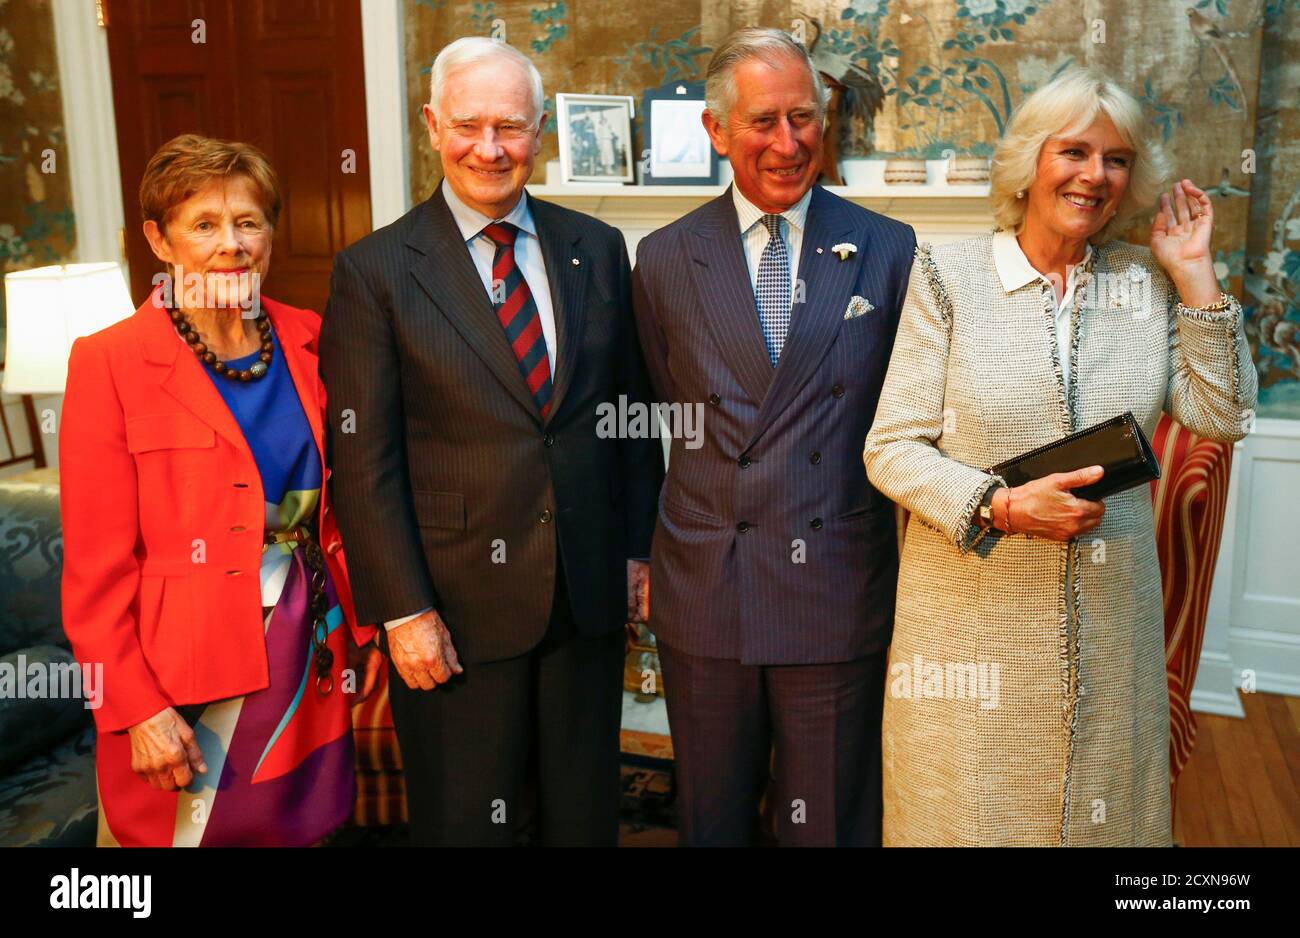 britains-prince-charles-and-camilla-duchess-of-cornwall-meet-the-governor-general-of-canada-david-johnson-2nd-l-and-his-wife-sharon-l-after-arriving-in-halifax-nova-scotia-may-18-2014-the-royal-couple-are-on-a-four-day-visit-to-canada-that-begins-in-halifax-and-includes-stops-in-pictou-nova-scotia-the-prince-edward-island-towns-of-charlottetown-bonshaw-and-cornwall-and-concludes-in-winnipeg-reutersmark-blinch-canada-tags-royals-society-entertainment-2CXN96W.jpg